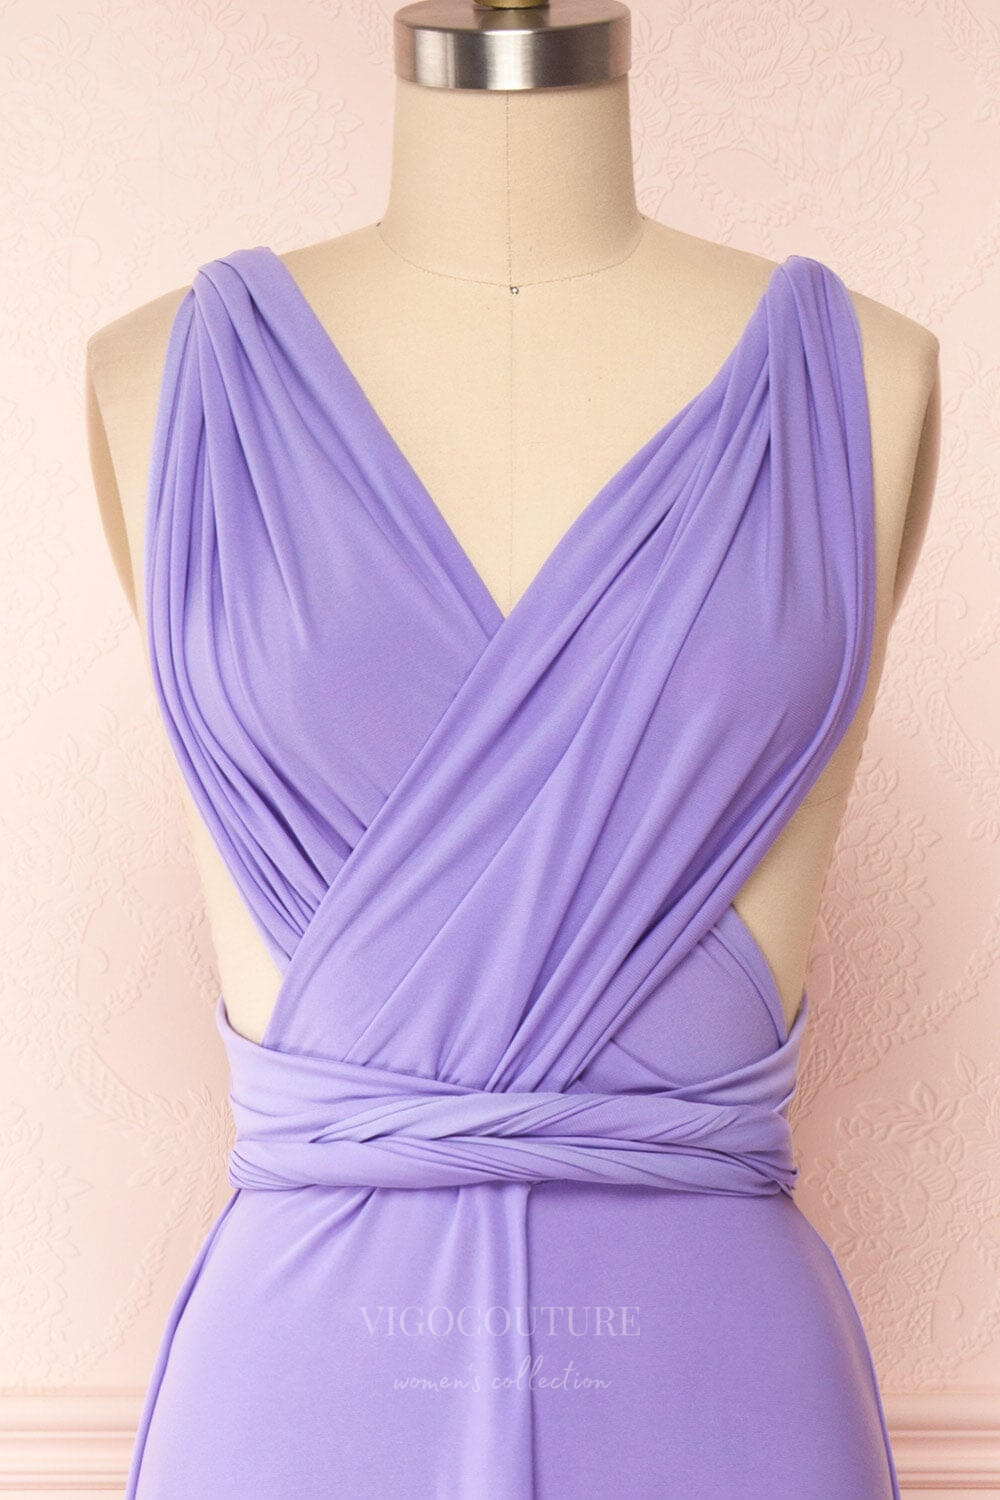 vigocouture-Convertible Bridesmaid Dress Stretchable Woven Dress Pleated Prom Dress Multiway Dress 20860-Lavender-Prom Dresses-vigocouture-